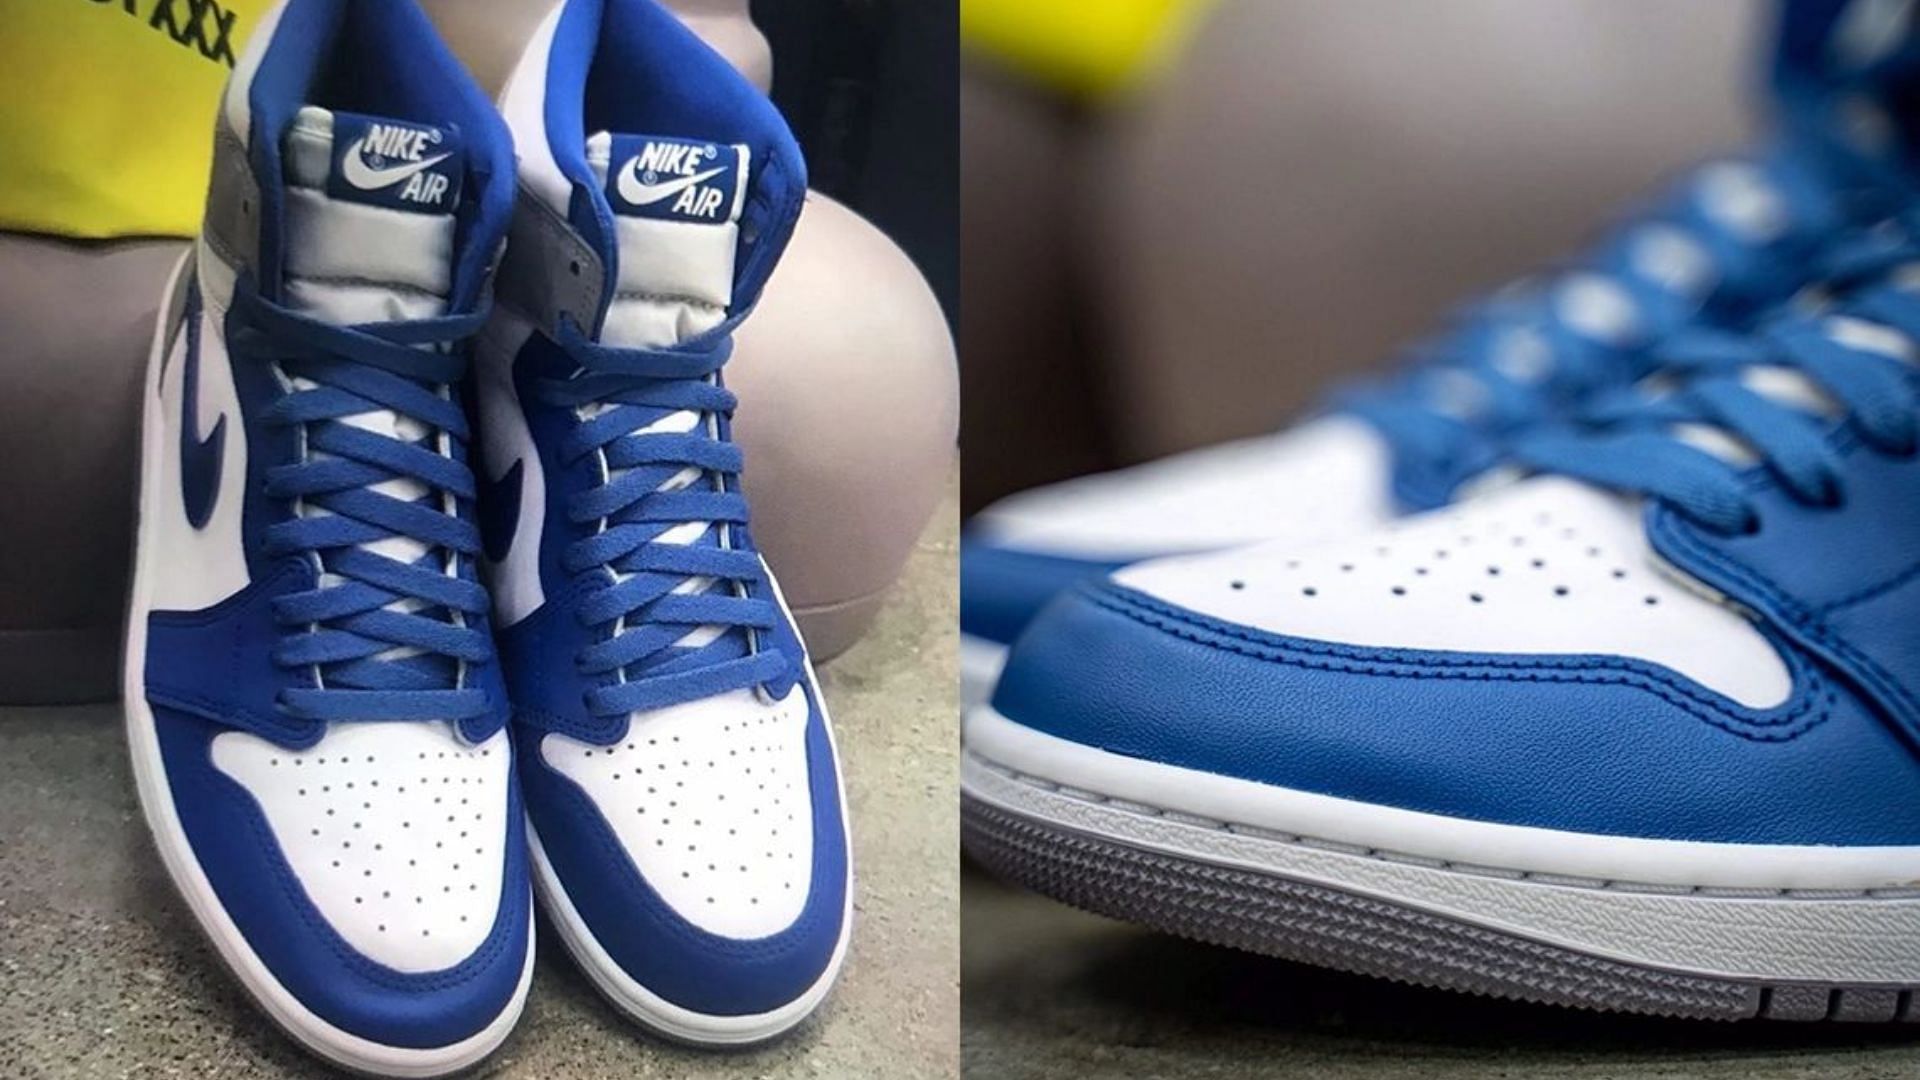 Where to buy Air Jordan 1 “True Blue” shoes? Price, release date